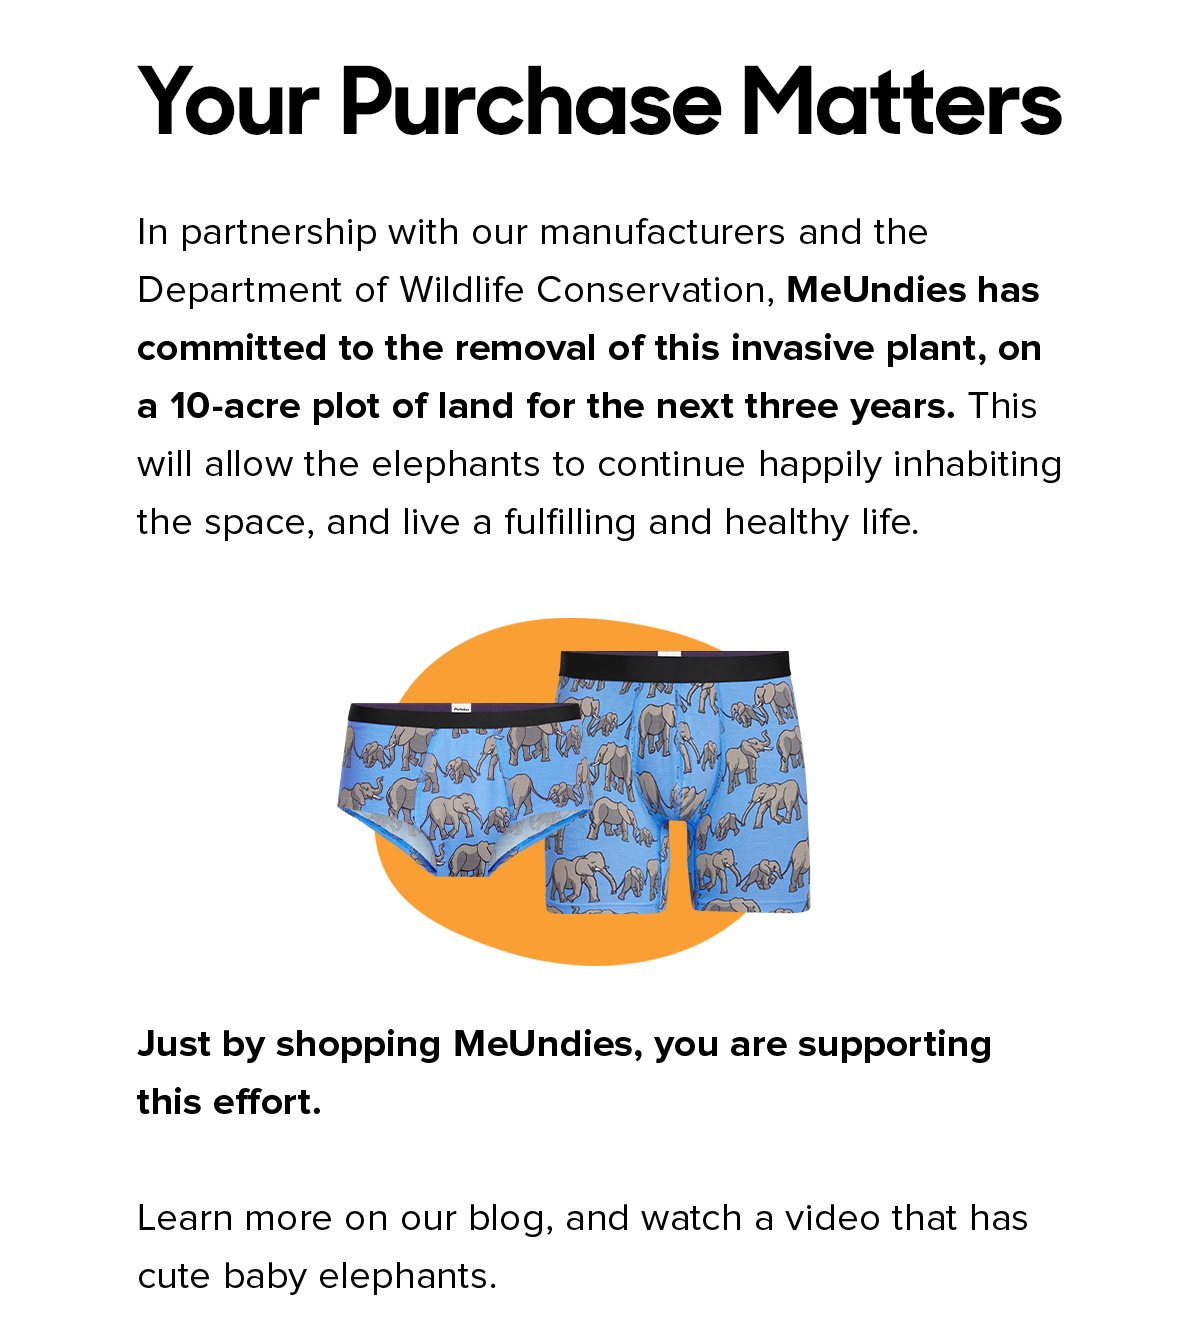 Your Purchase Matters In partnership with our manufacturers and the Department of Wildlife Conservation, MeUndies has committed to the removal of this invasive plant, on a 10-acre plot of land for the next three years. This will allow the elephants to continue happily inhabiting the space, and live a fulfilling and healthy life. Just by shopping MeUndies, you are supporting this effort. Learn more on our blog, and watch a video that has cute baby elephants. 